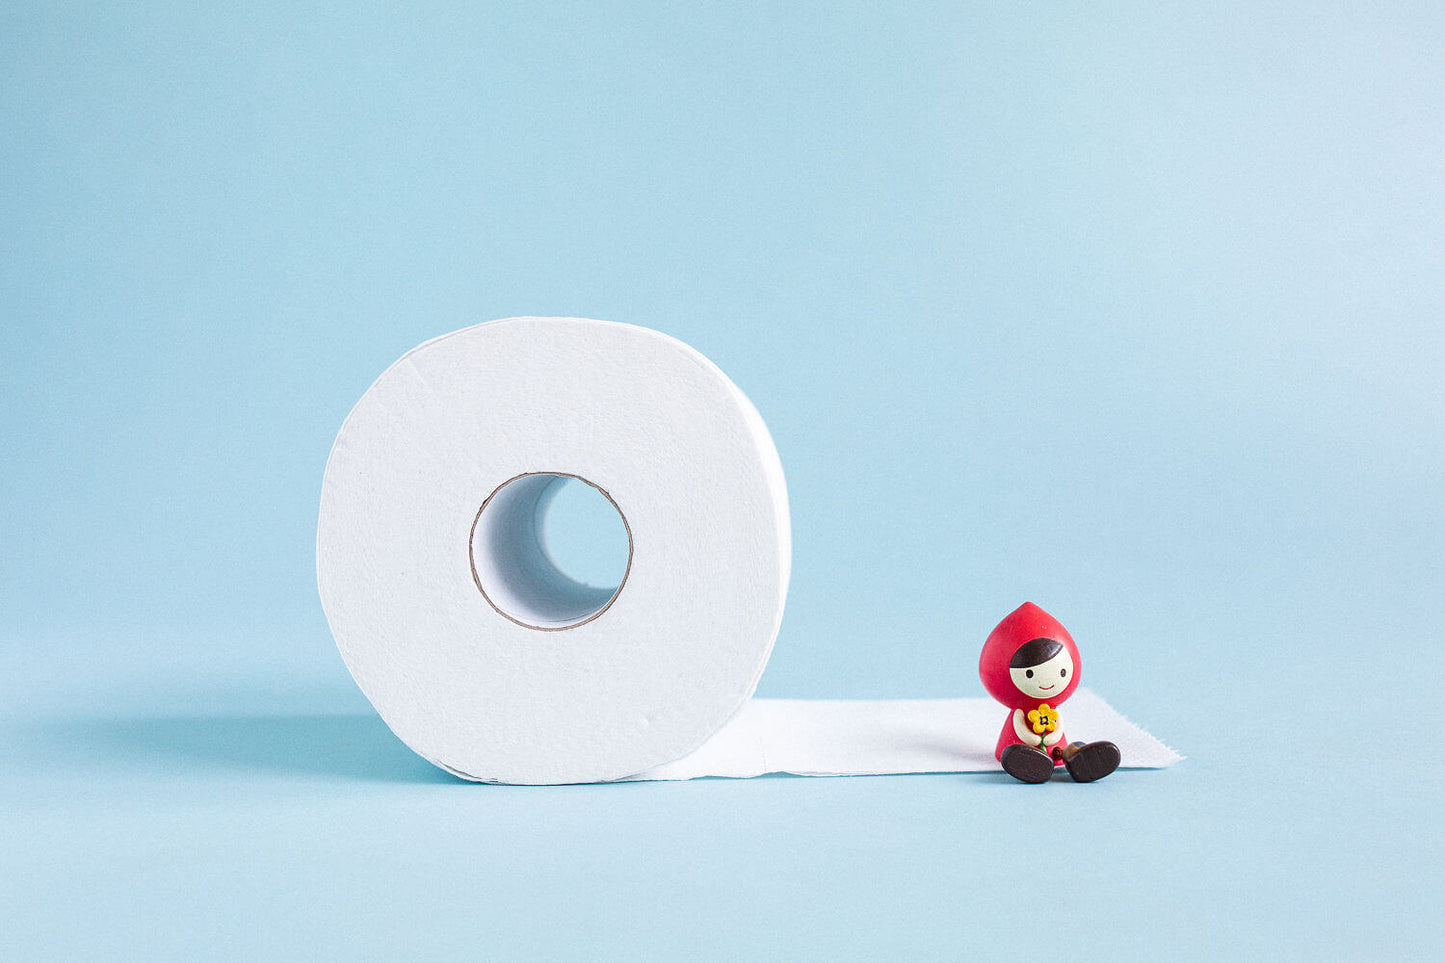 eco toilet paper with a portion unrolled on the ground. A small red toy girl figurine sitting on the unrolled portion.